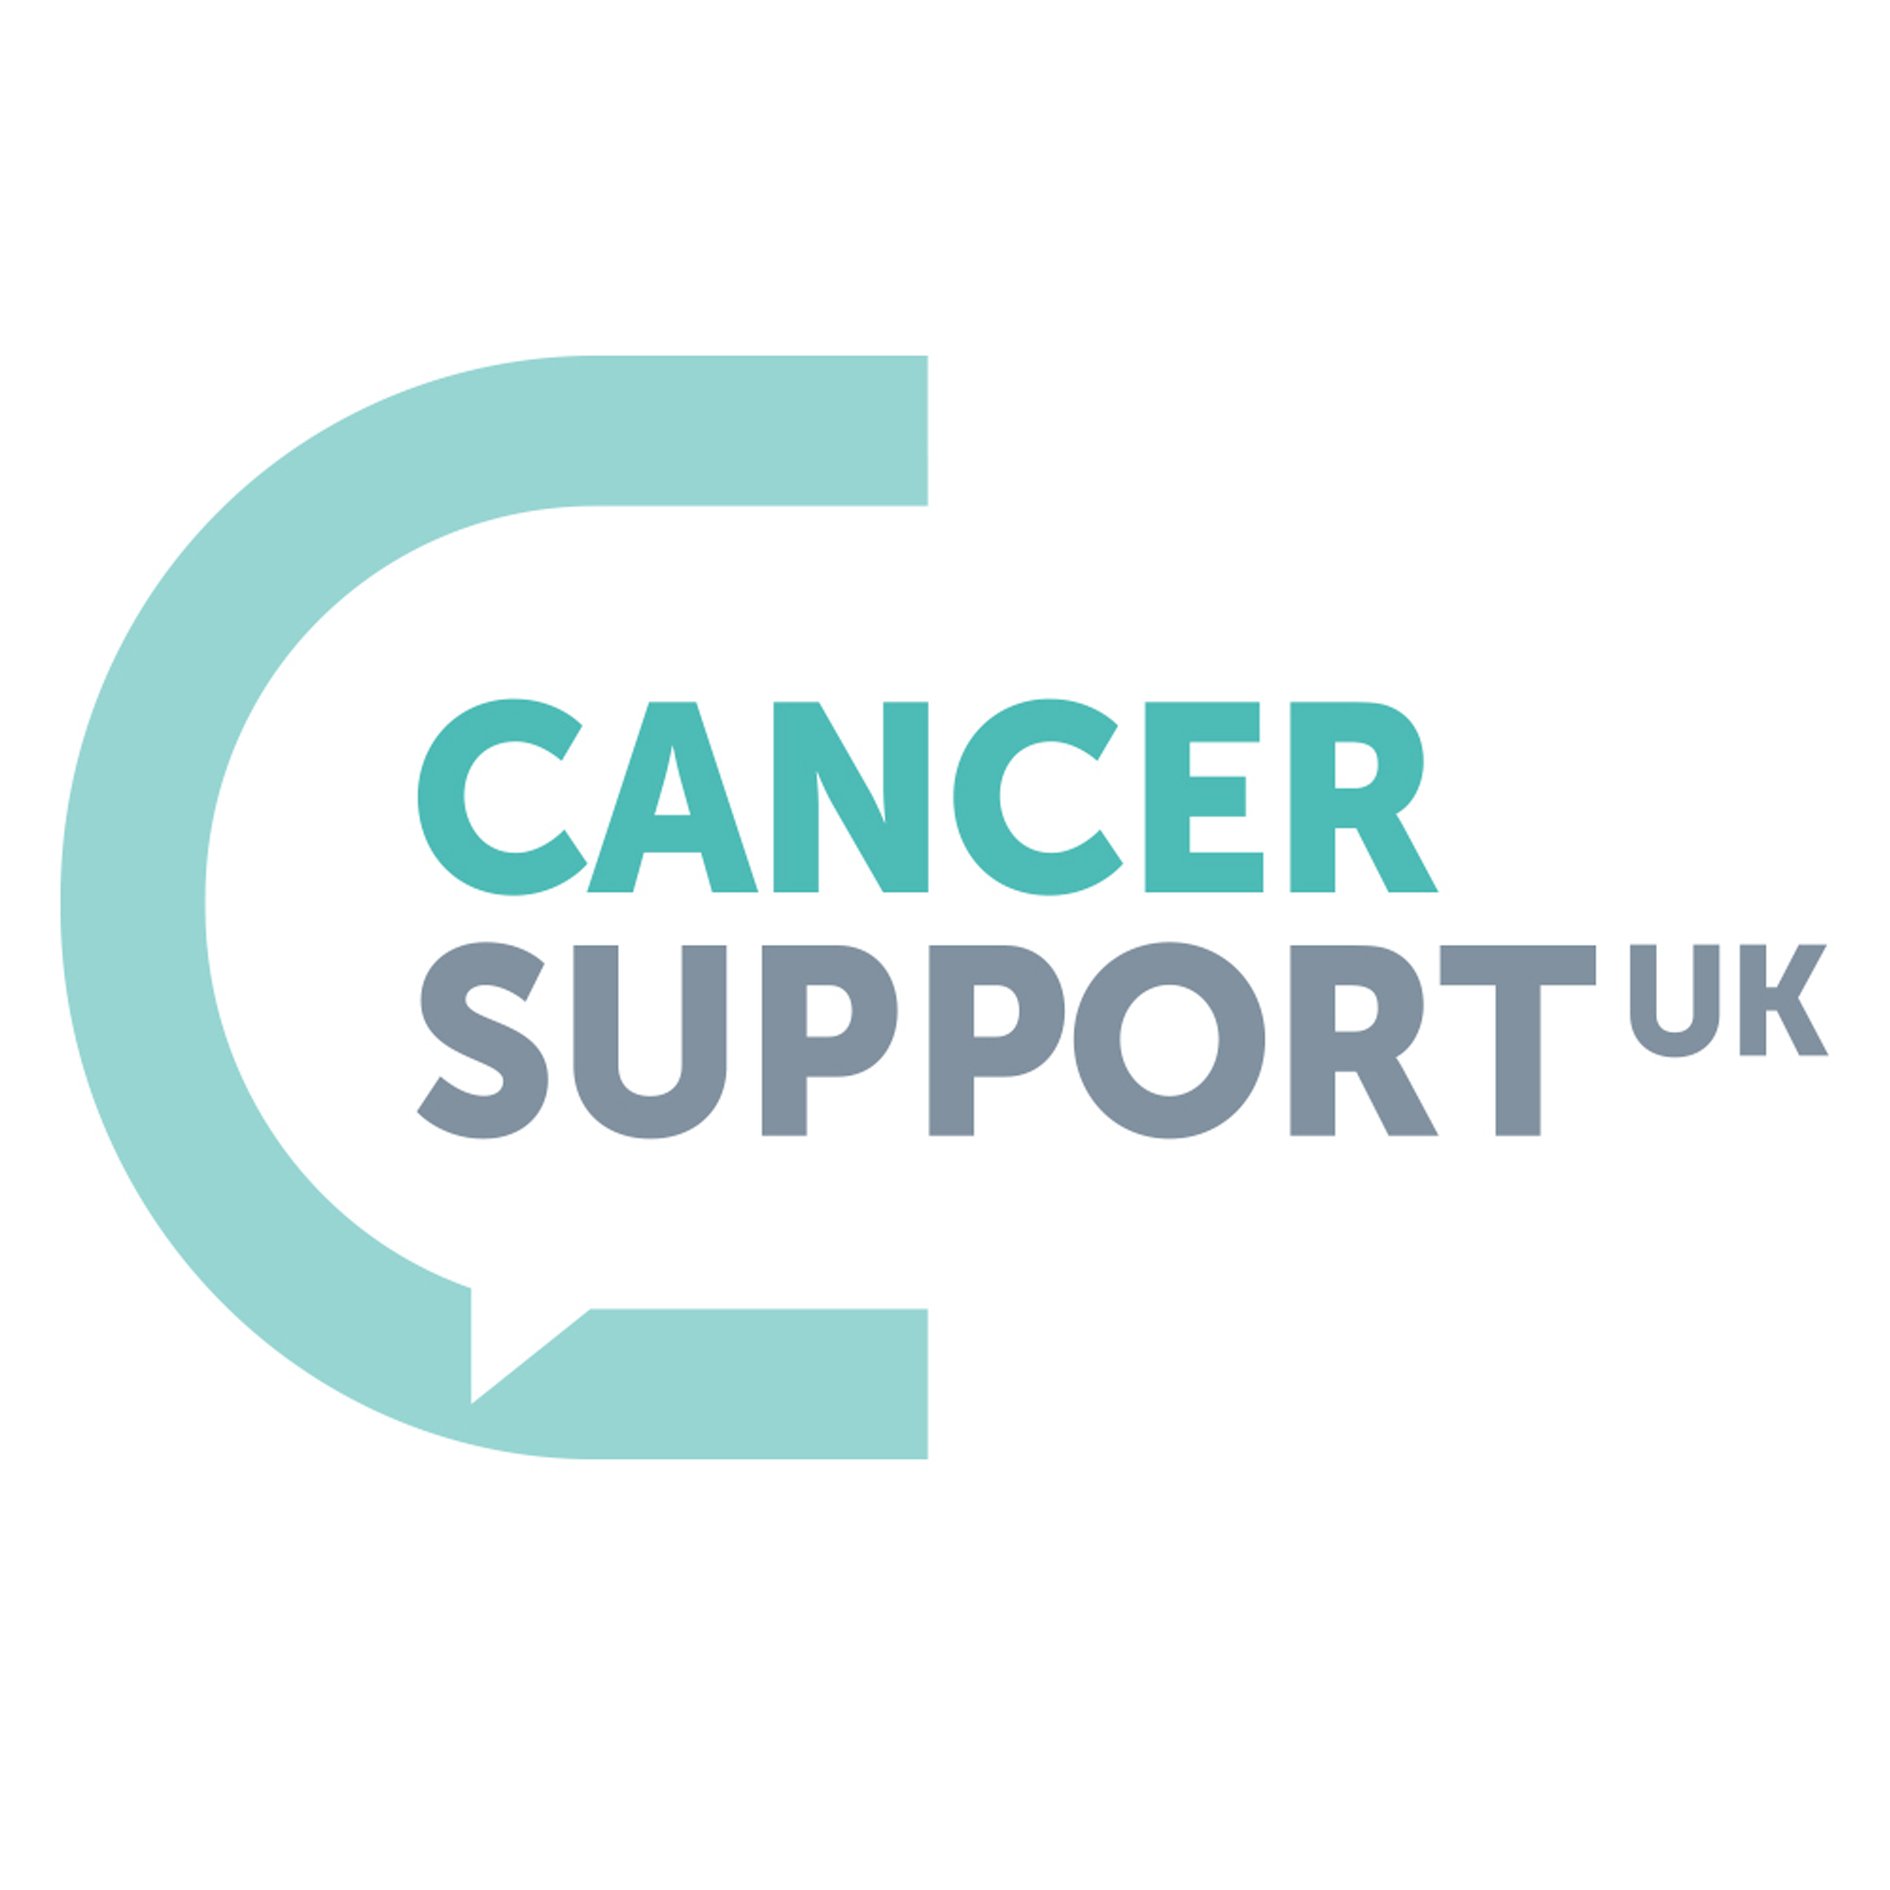 We provide practical & emotional support to people living with & beyond #Cancer. Our services include: #CancerCoach #CancerKits #WorkplaceCancerSupportTraining